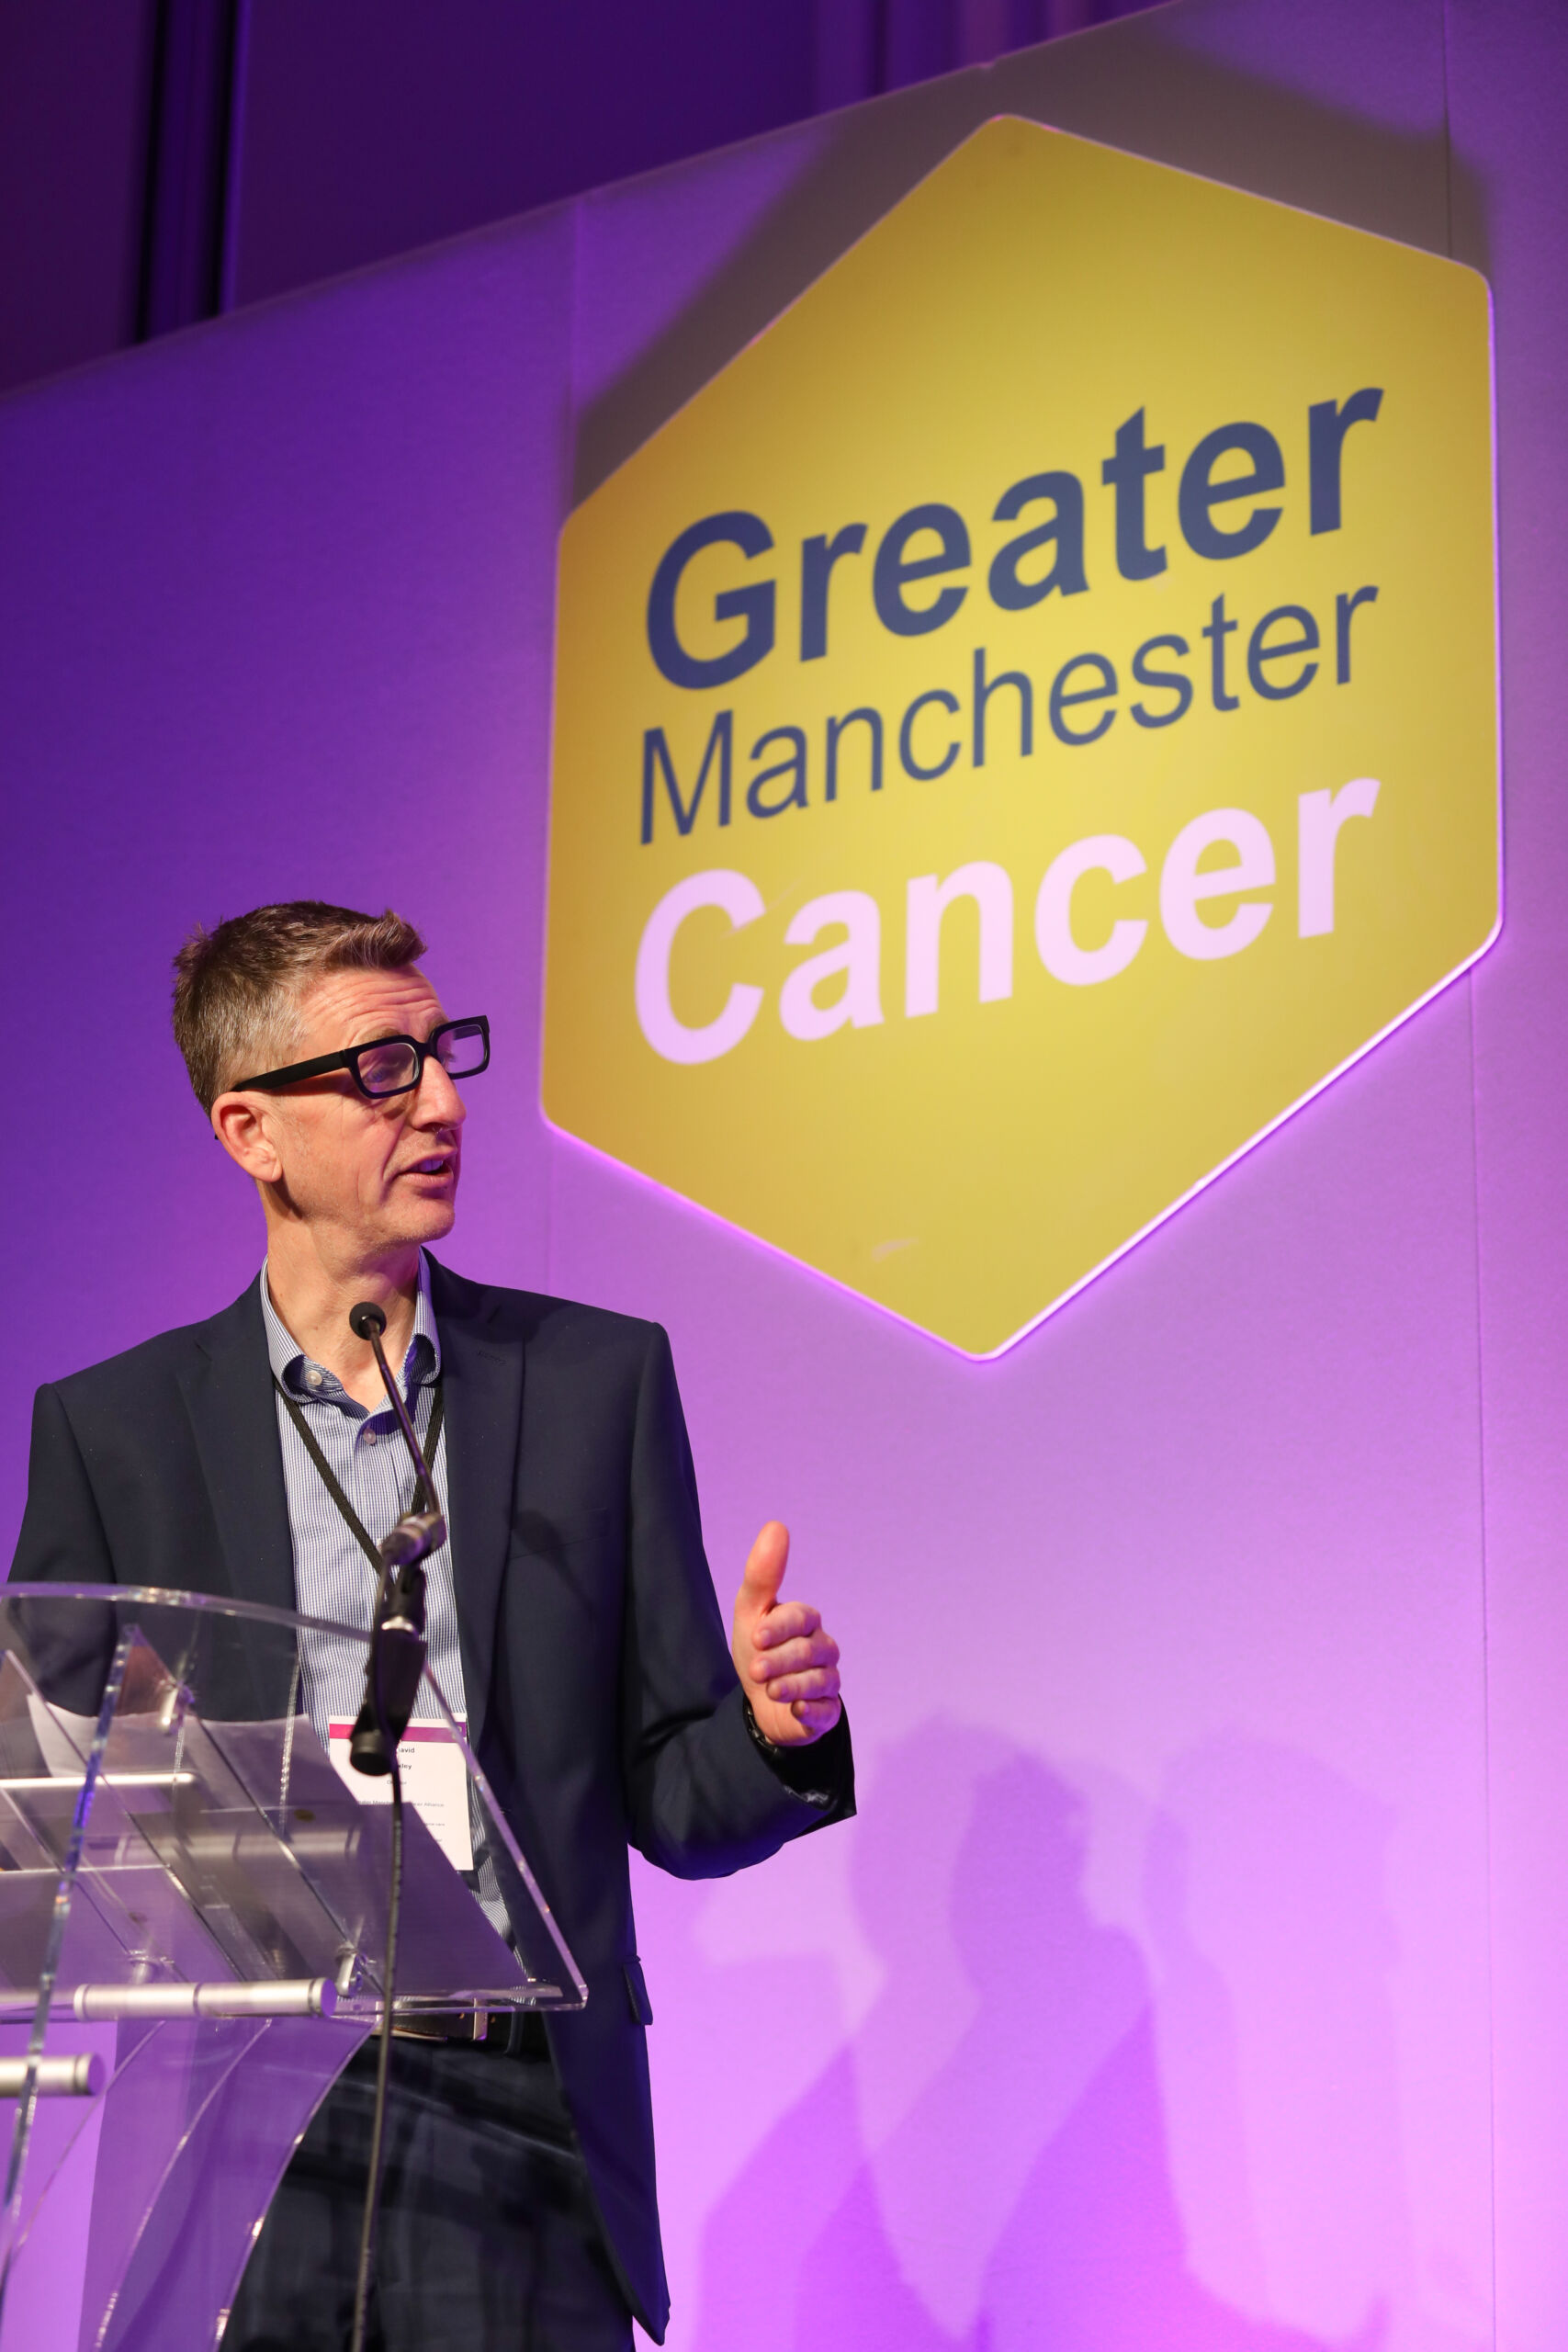 A white man in a dark suit stands on stage at a lectern in front of a green hexagon with the words Greater Manchester Cancer written on it